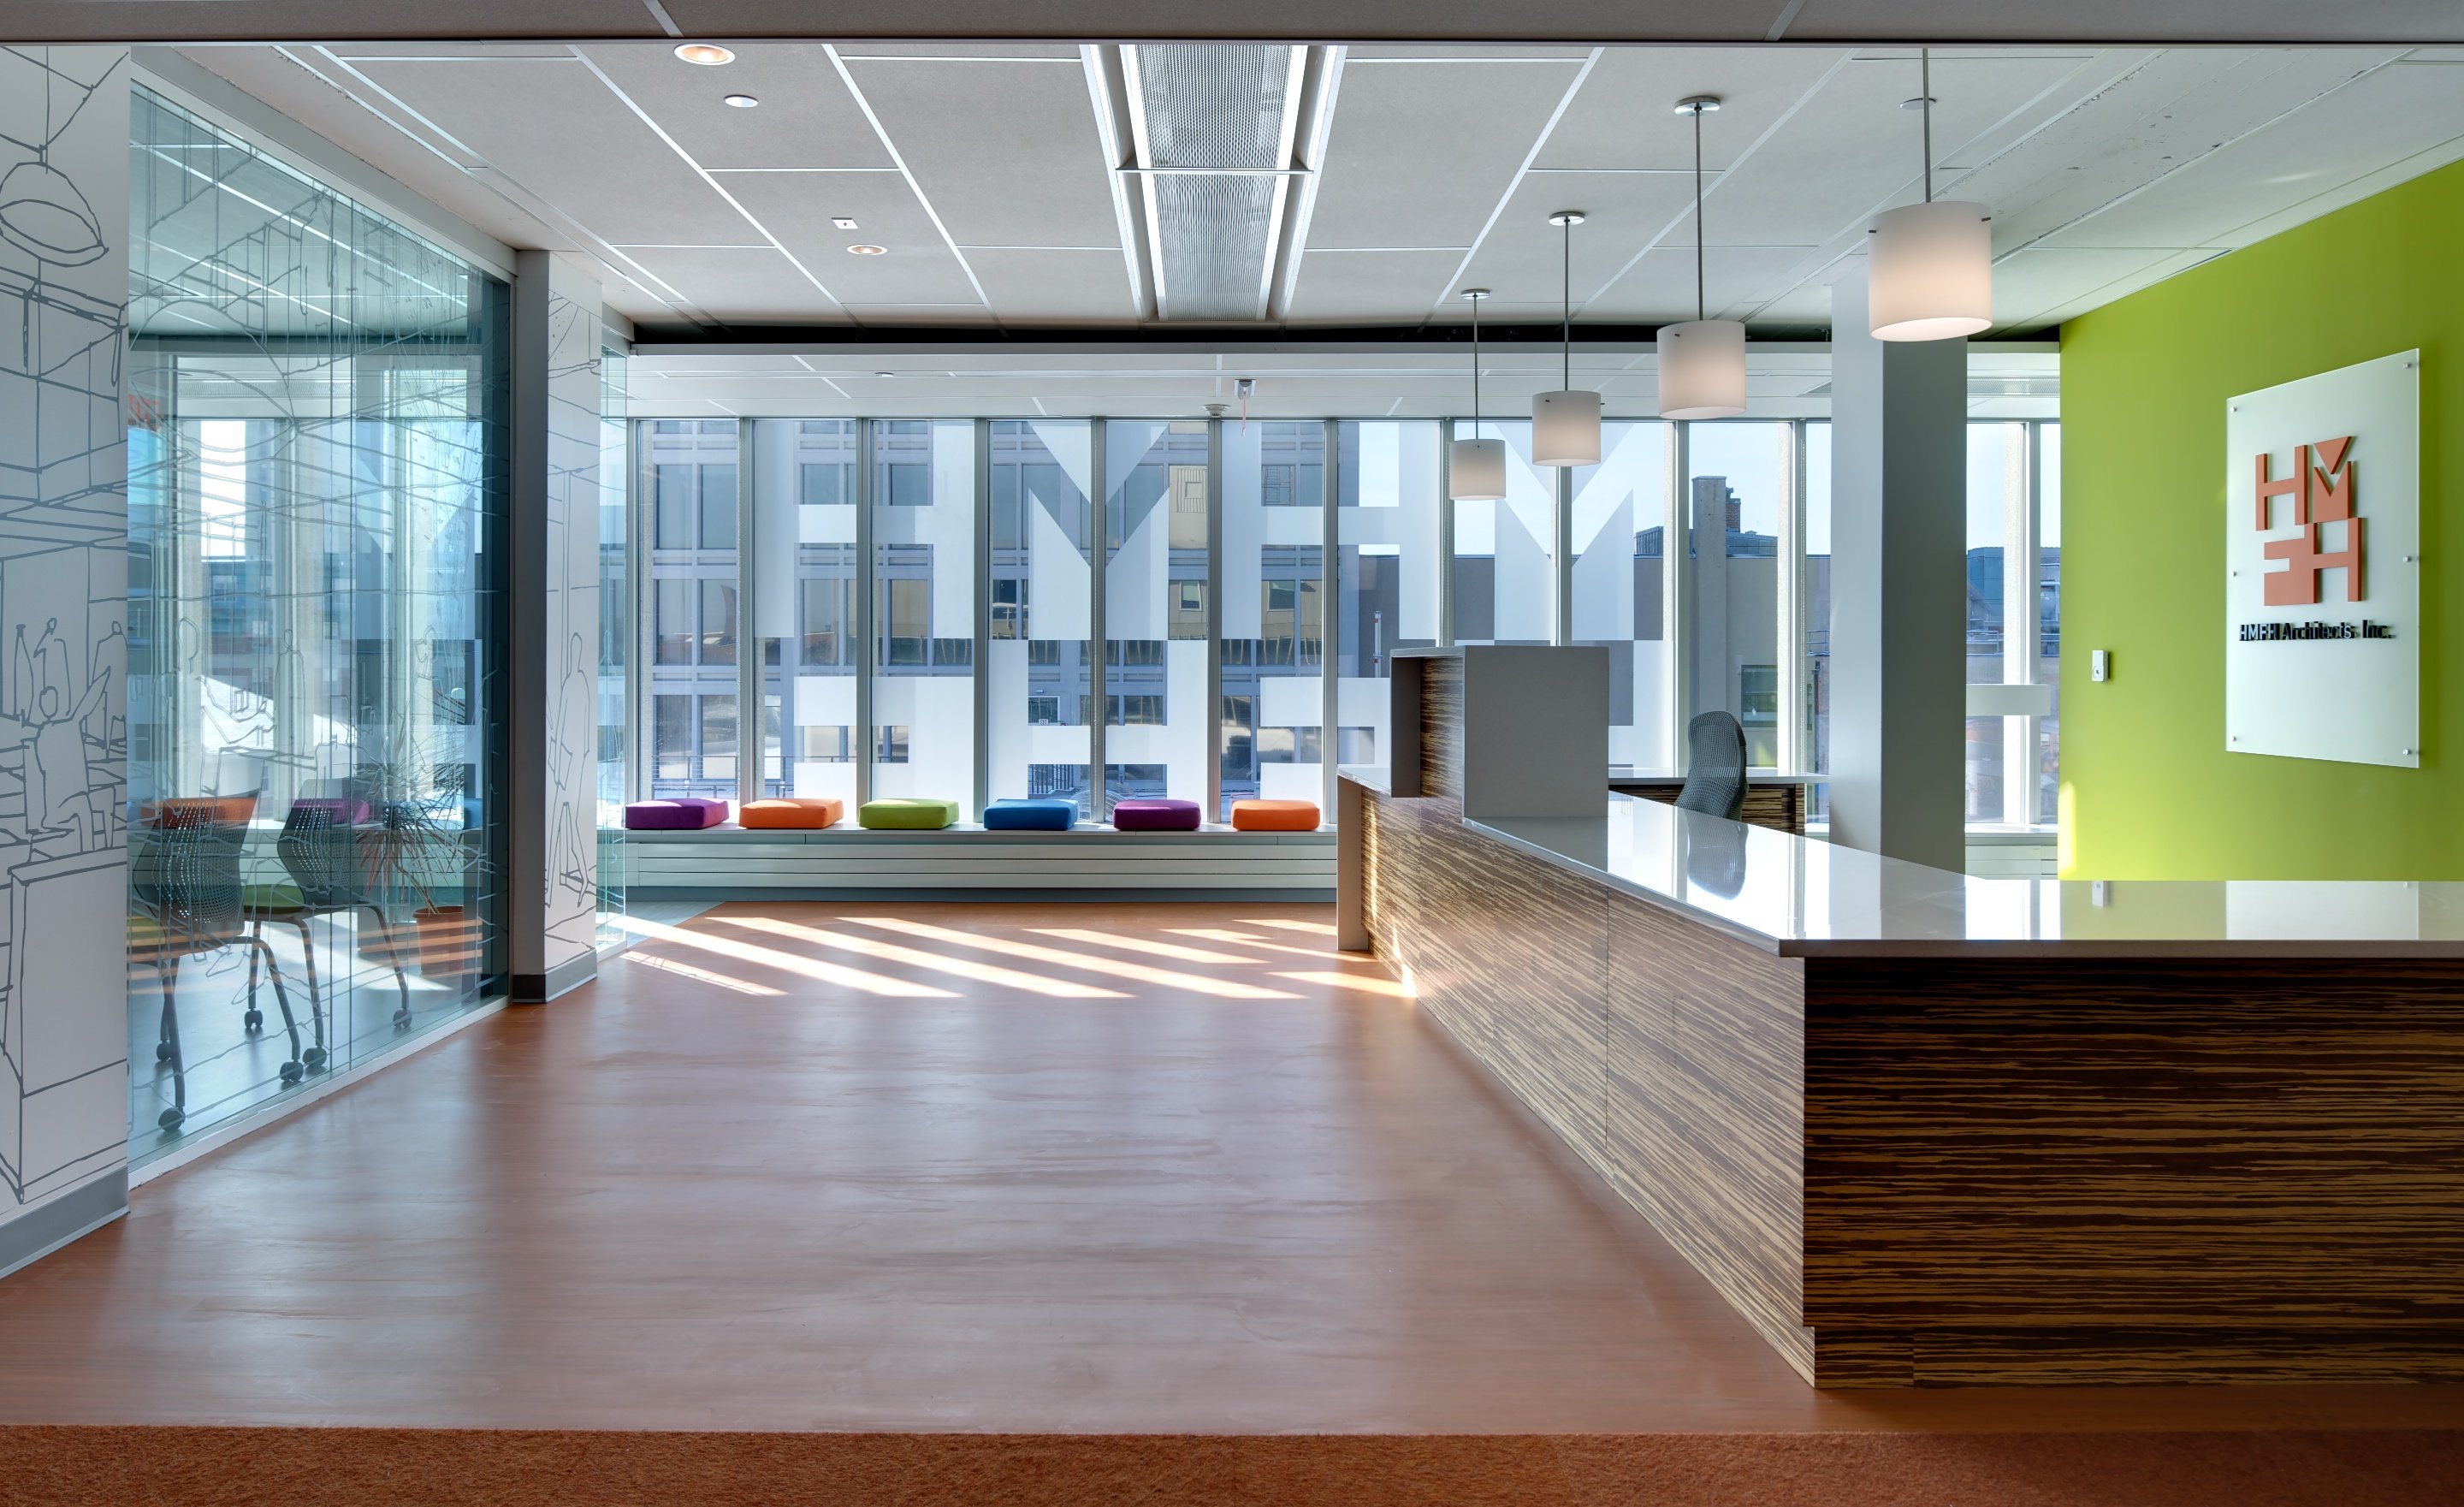 Office lobby with active chilled beams installed in ceiling